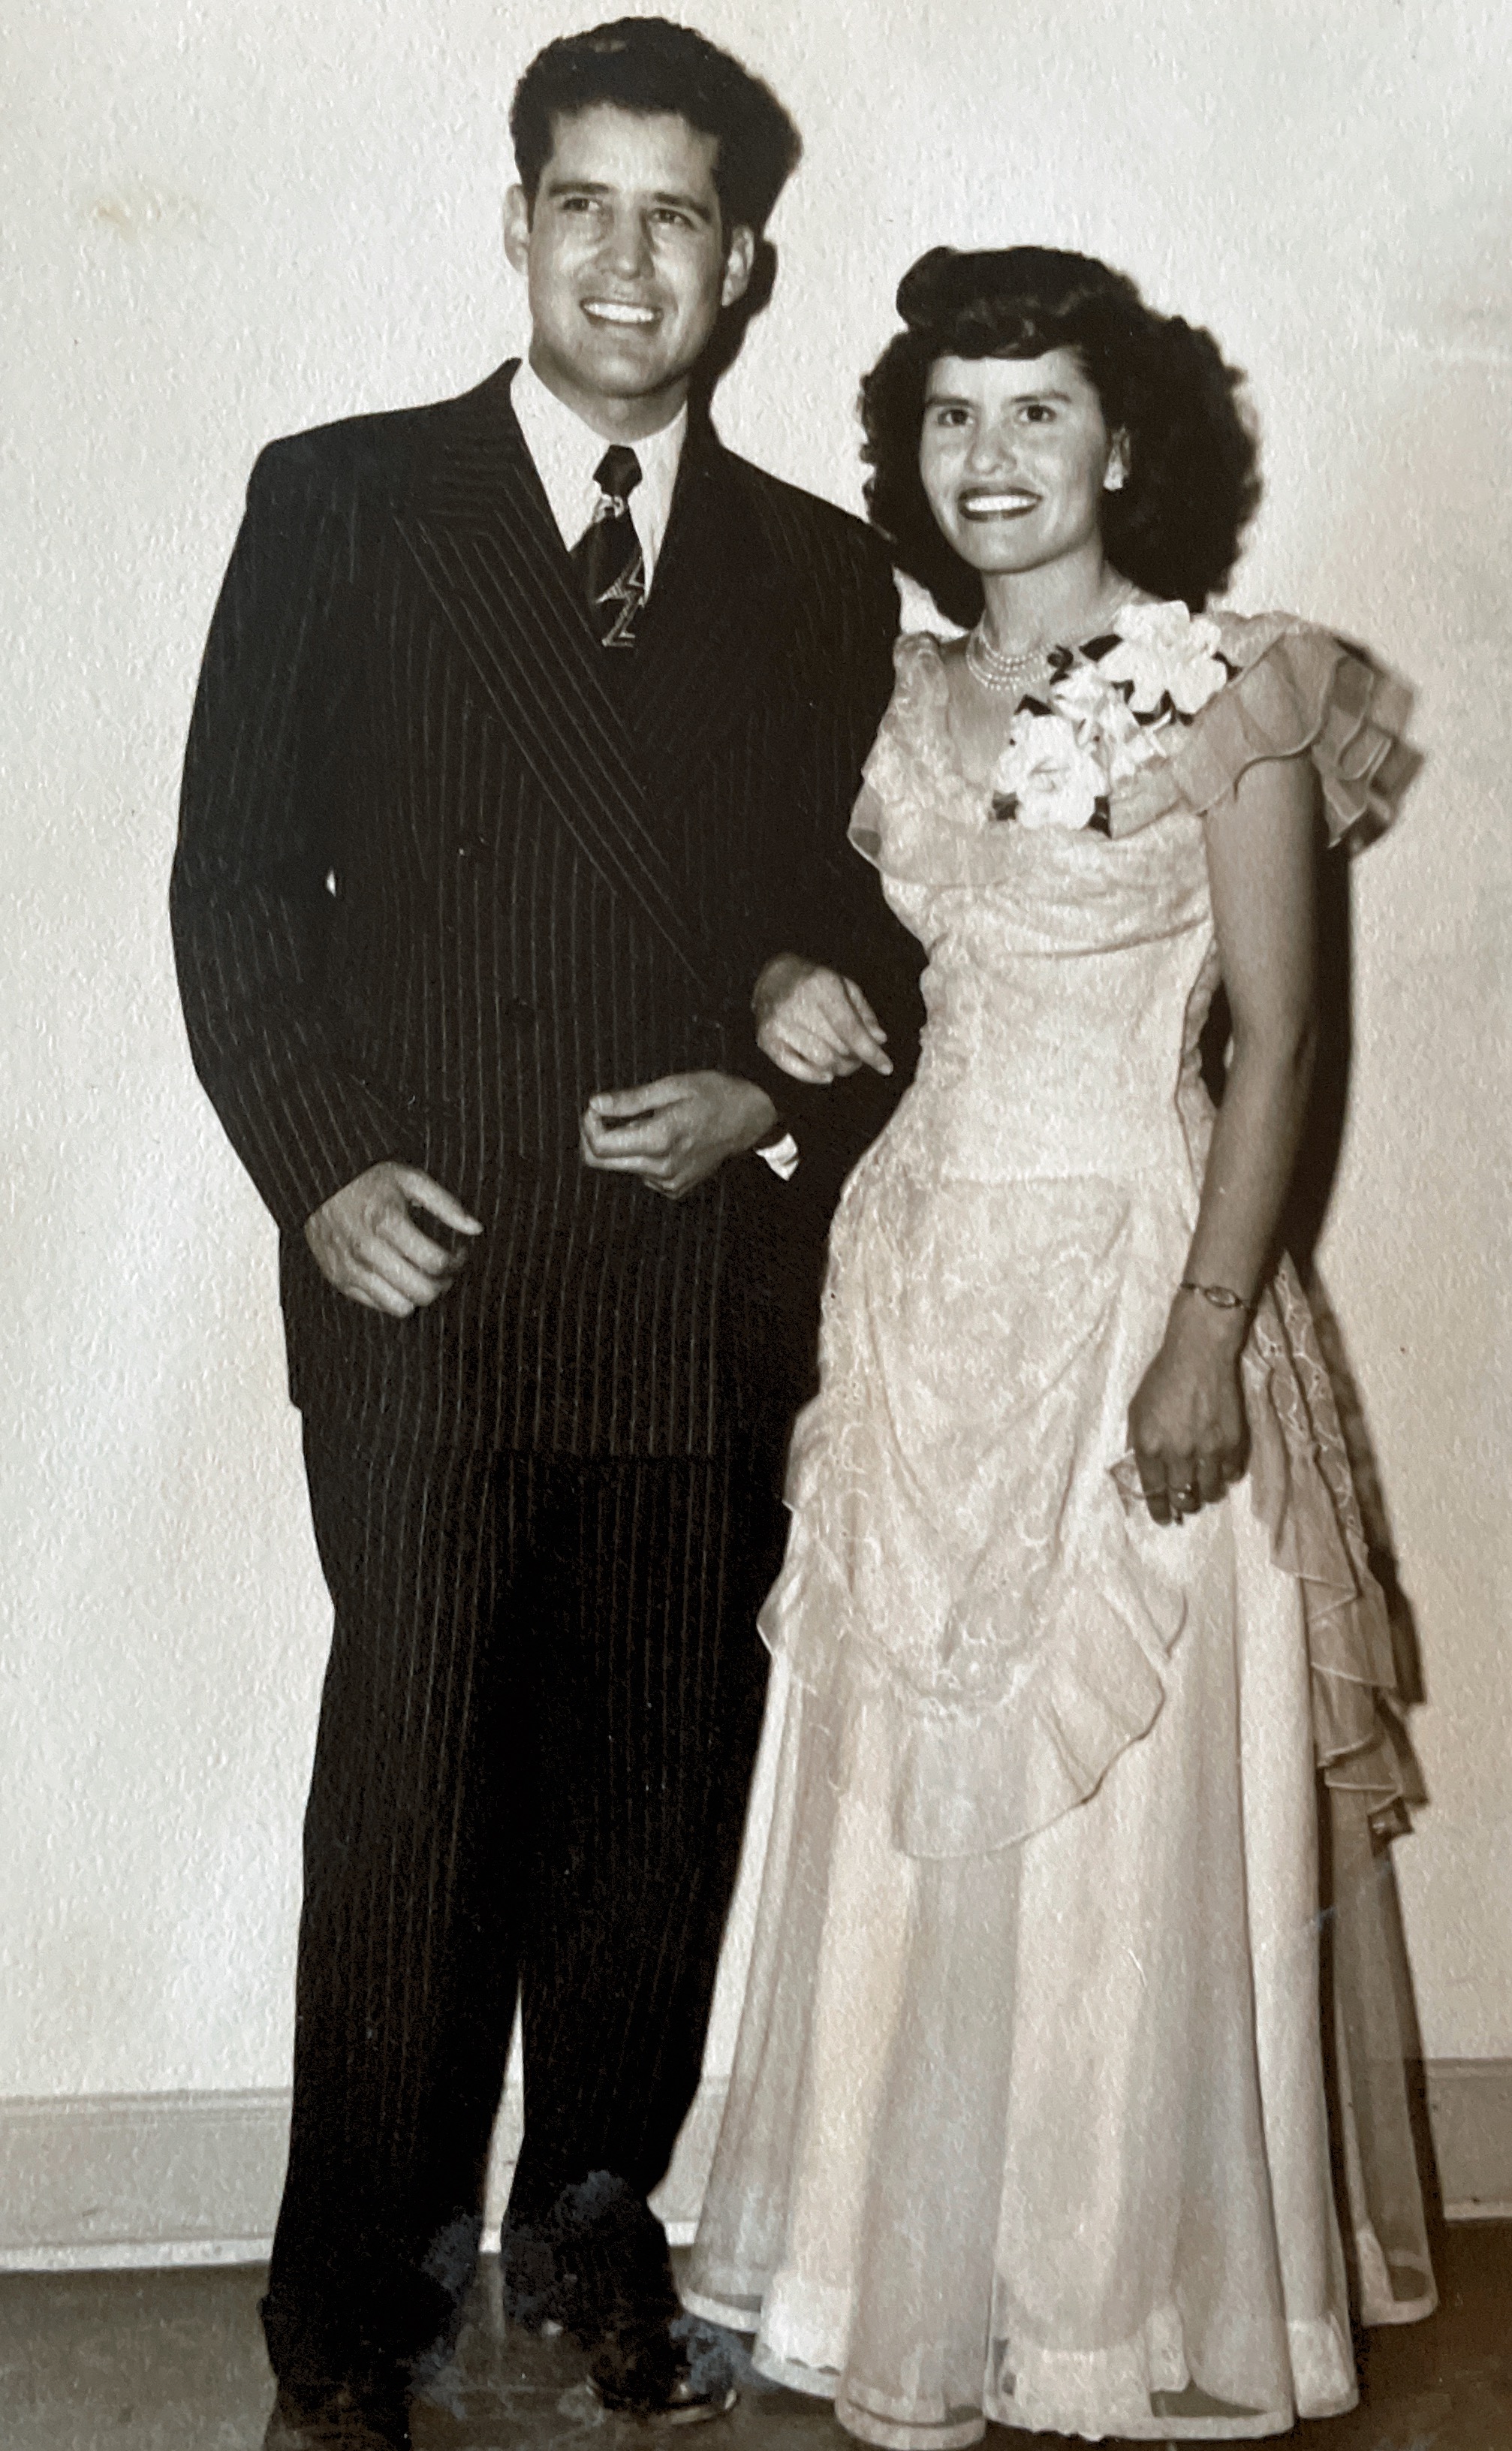 Rose and Saul Corday 
Married February 4, 1950p